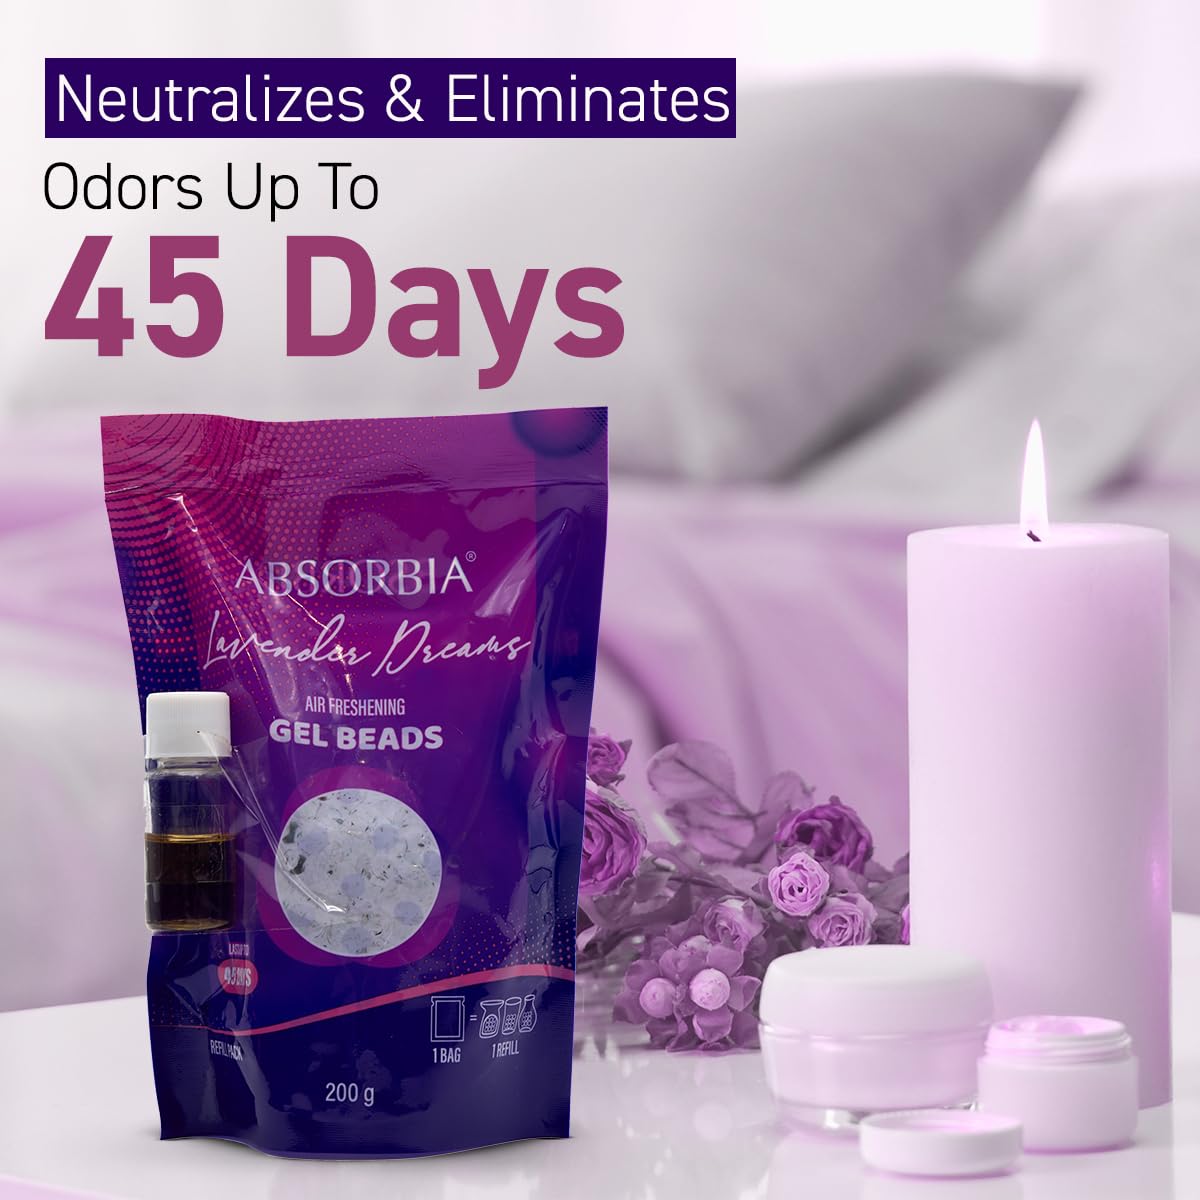 Absorbia Lavender Dreams Gel Beads Air Freshener - 200g with 8 ml refill fragrance Enjoy 45 Days of Tranquil Fragrance Renewal for office Room and Home